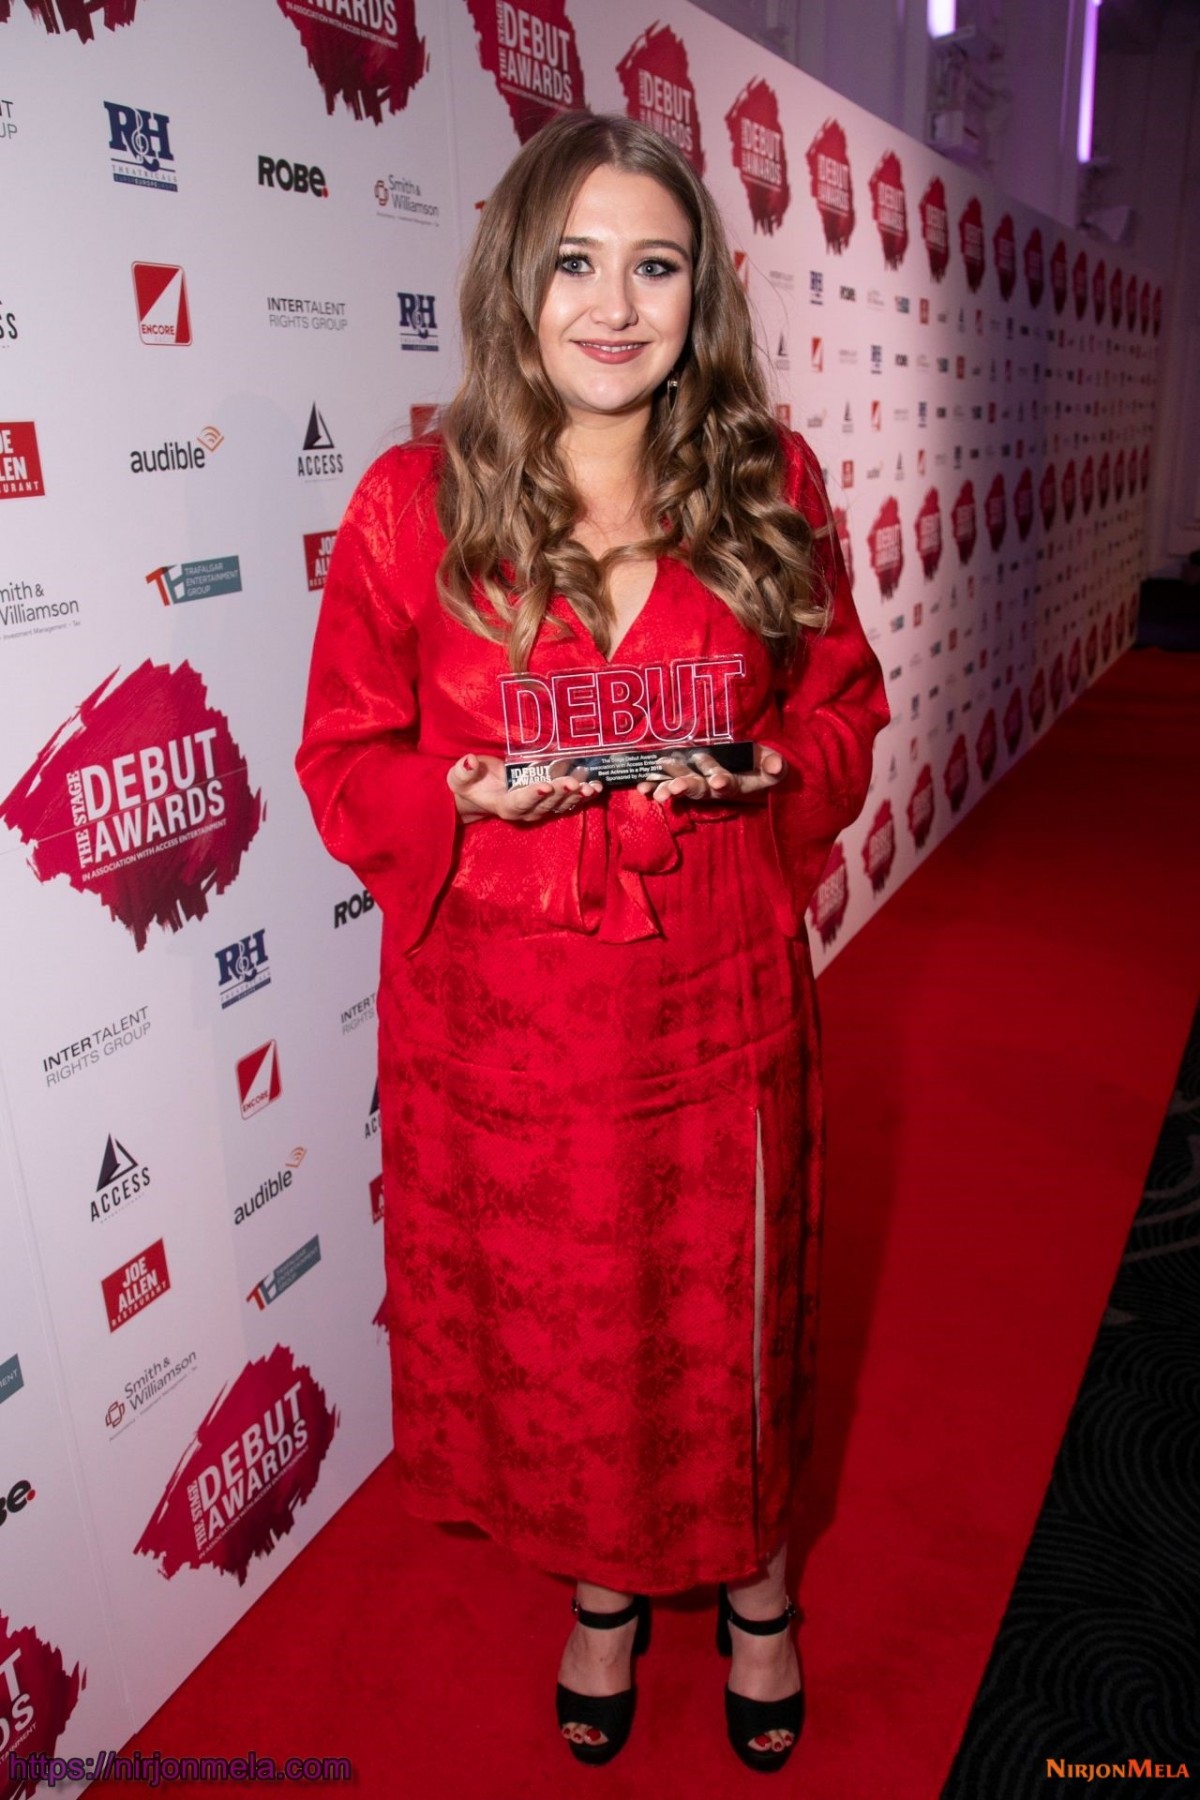 gemma-dobson-the-stage-debut-awards-2018-in-london-0.jpg